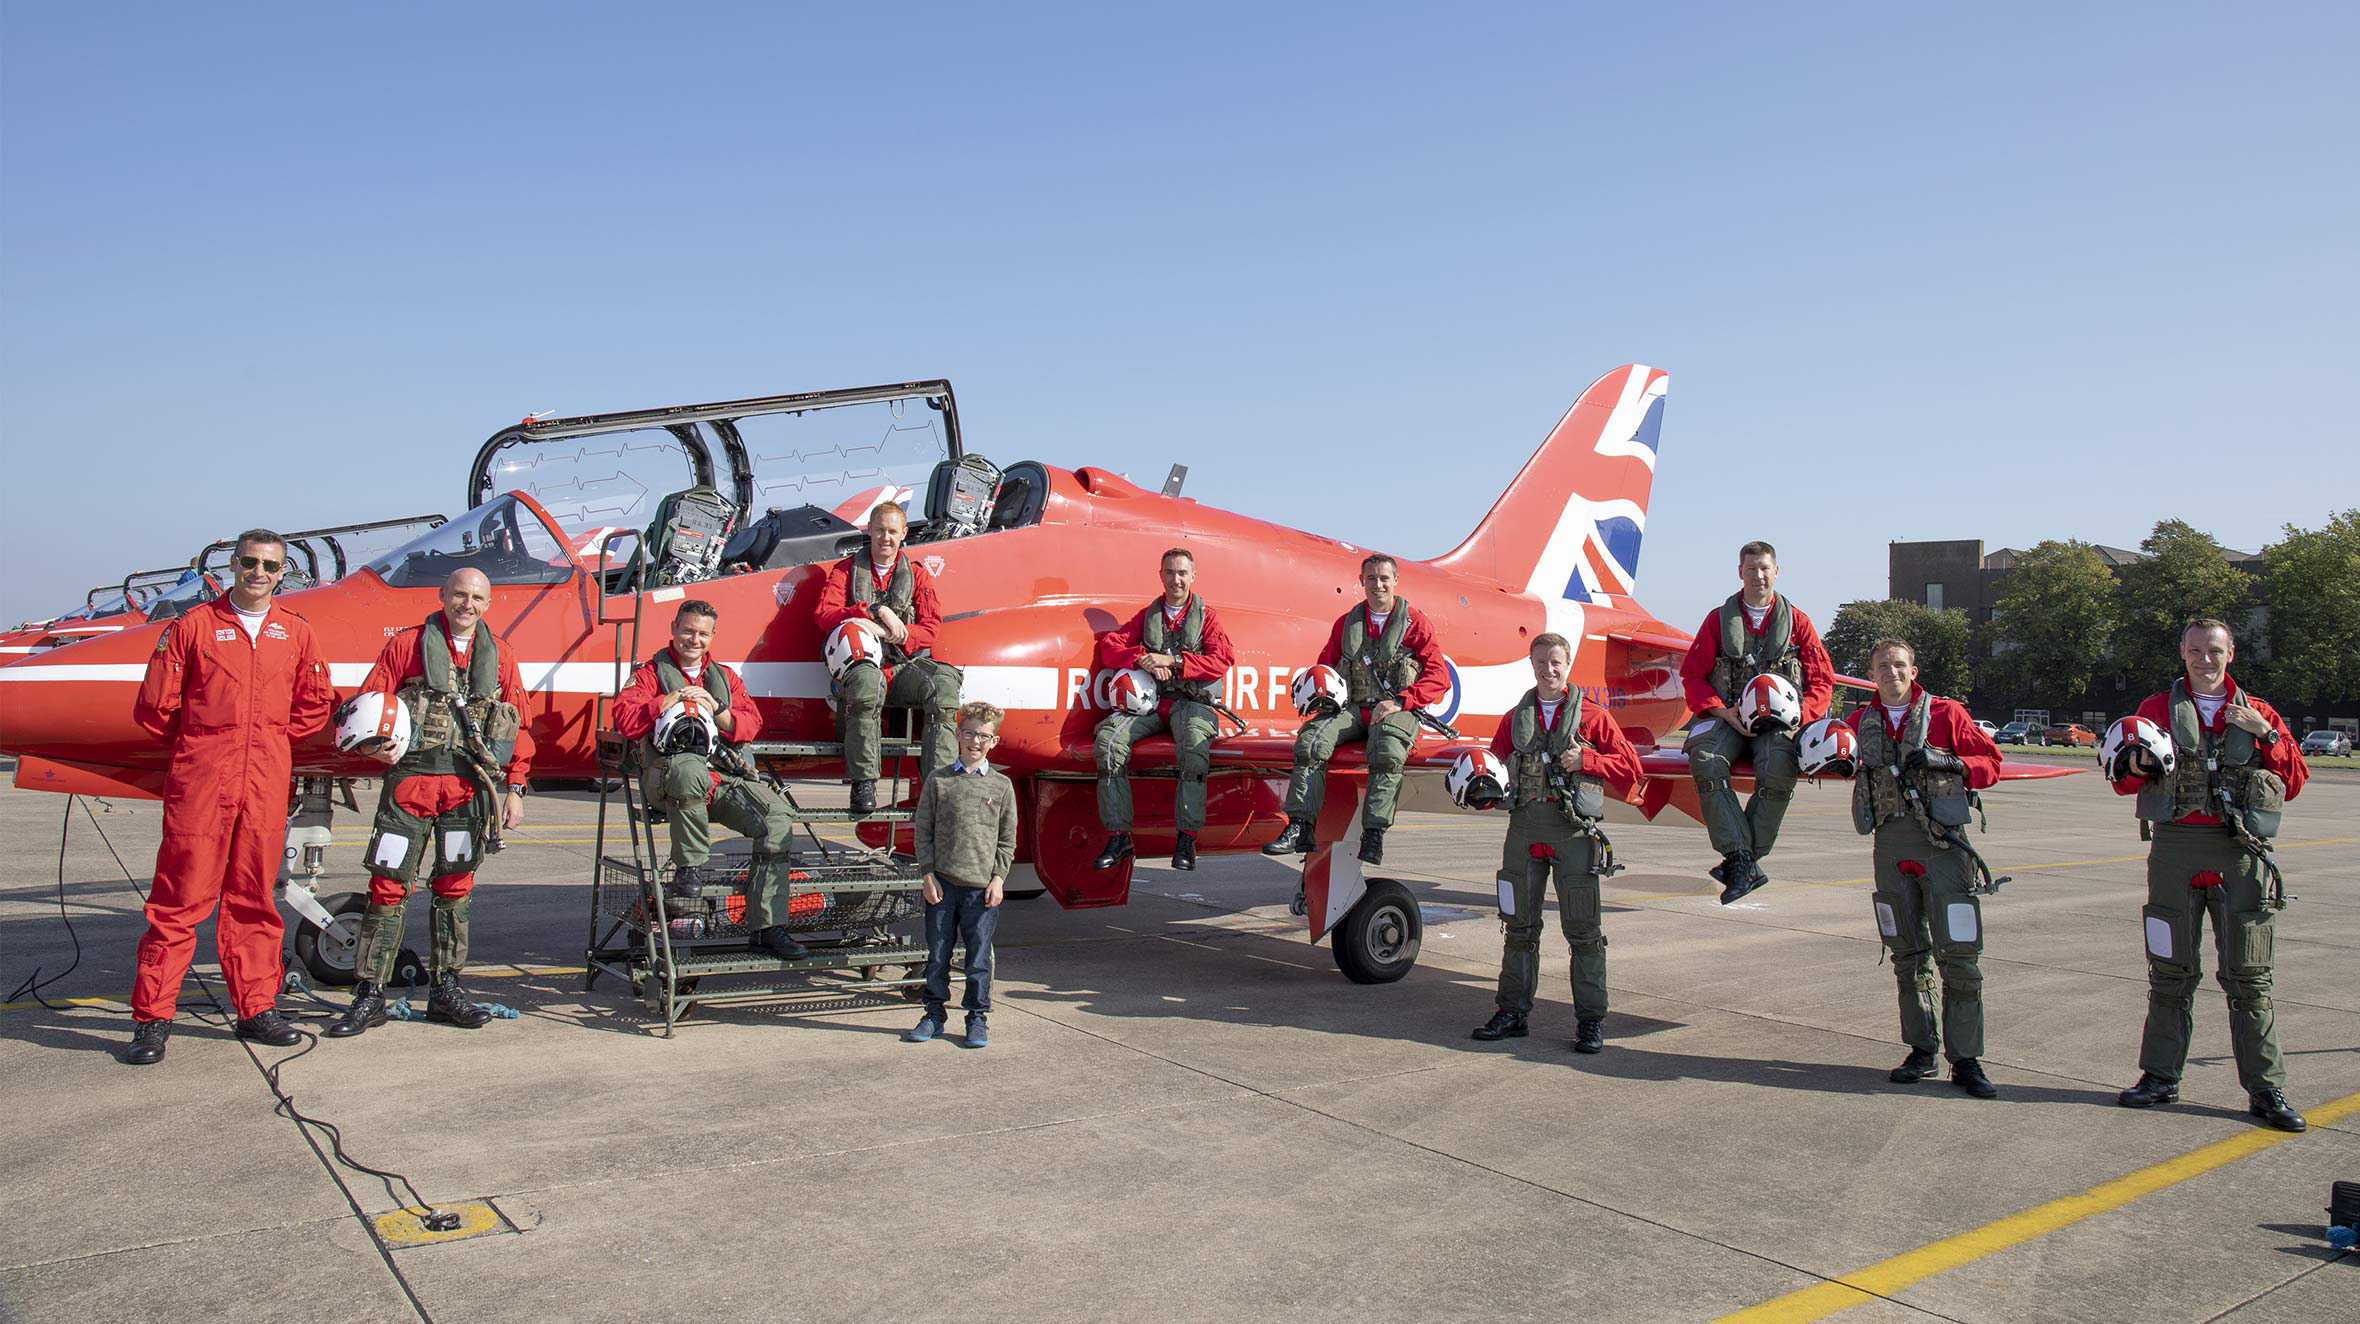 John posing in front of a Red Arrows jet with the pilots and ground crew.